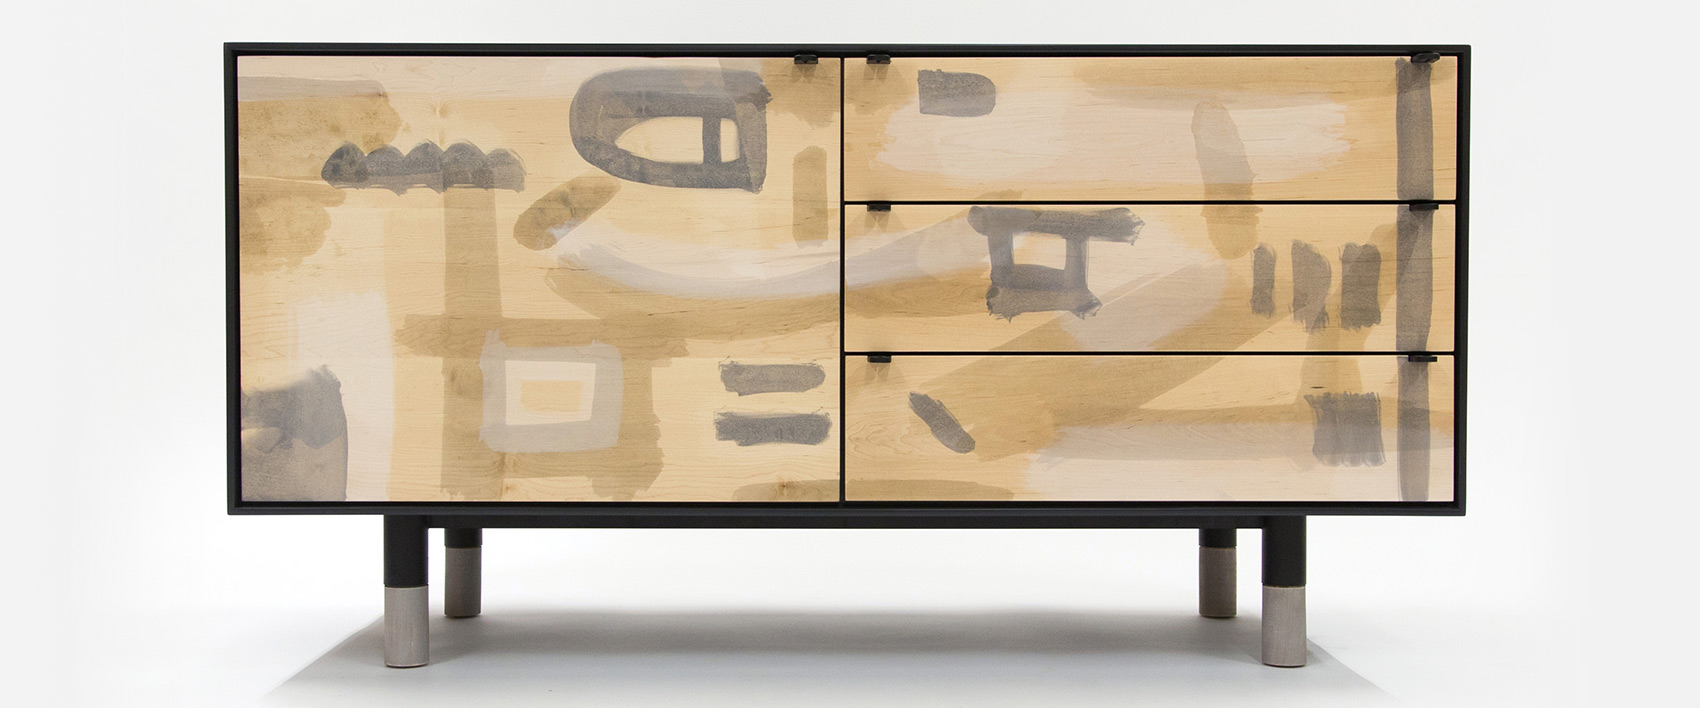 bespoke furniture make a statement with a hand-painted piece of furniture.  1_brisesdeprintemps_ninahelms HYEWGGP